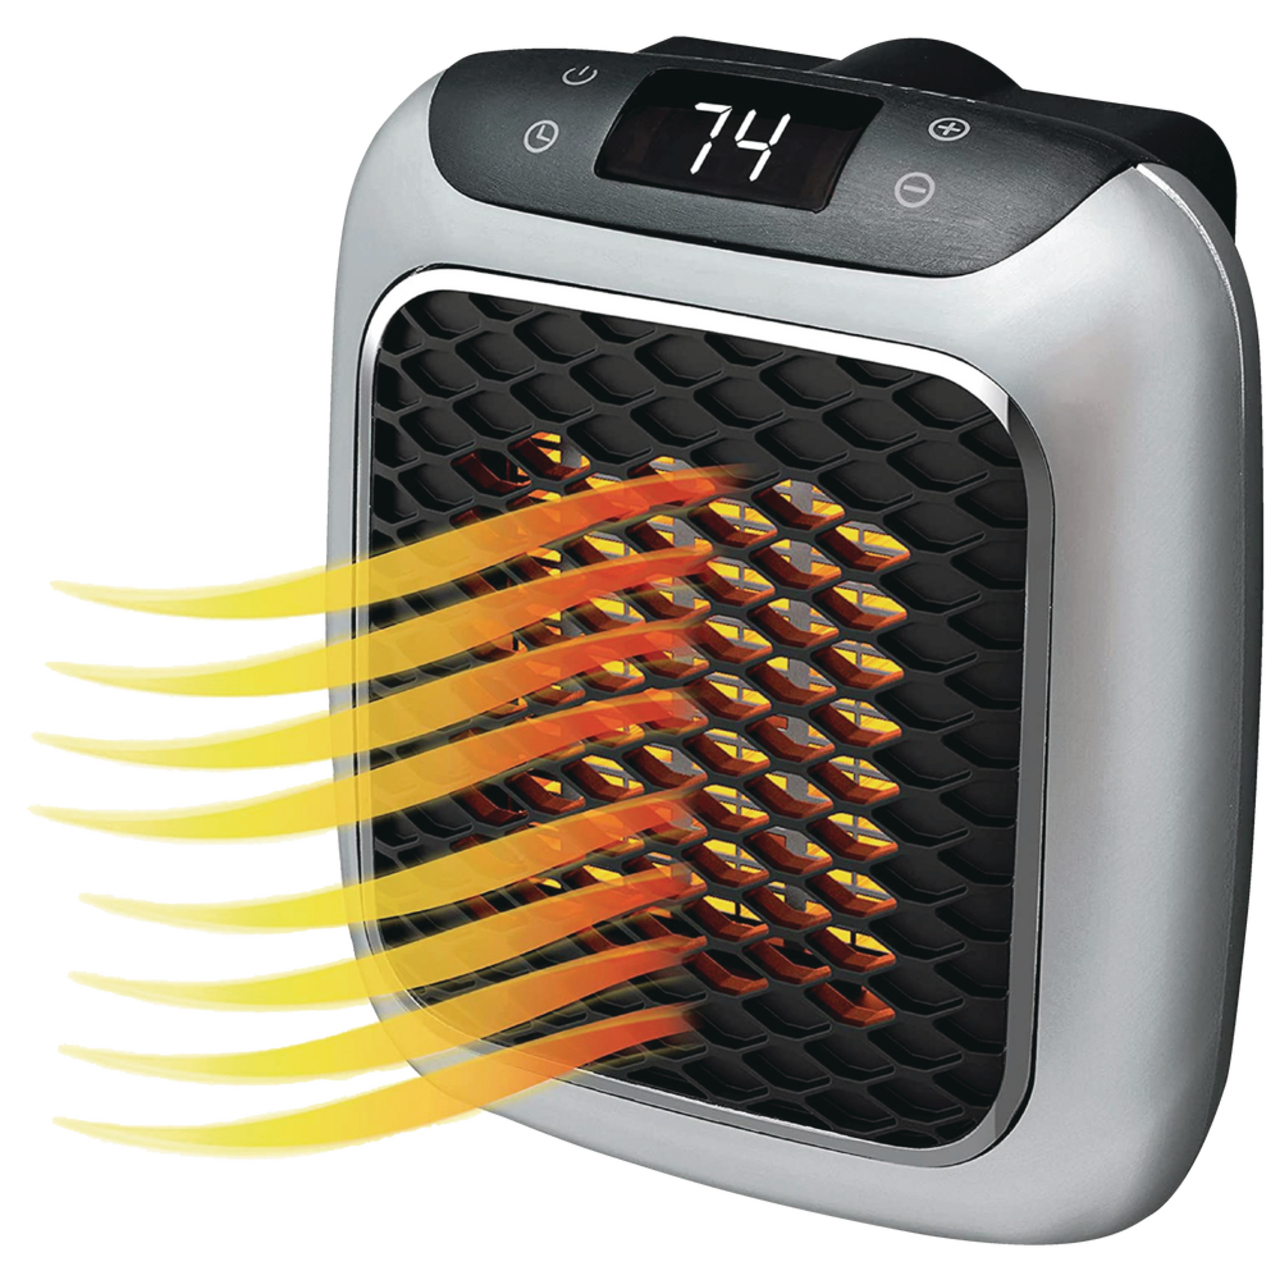 https://media-www.canadiantire.ca/product/living/as-seen-on-tv/asotv/4990098/handy-heater-turbo-800-d0b97e7f-2df3-4030-ba9d-43182857ffbe.png?imdensity=1&imwidth=1244&impolicy=mZoom